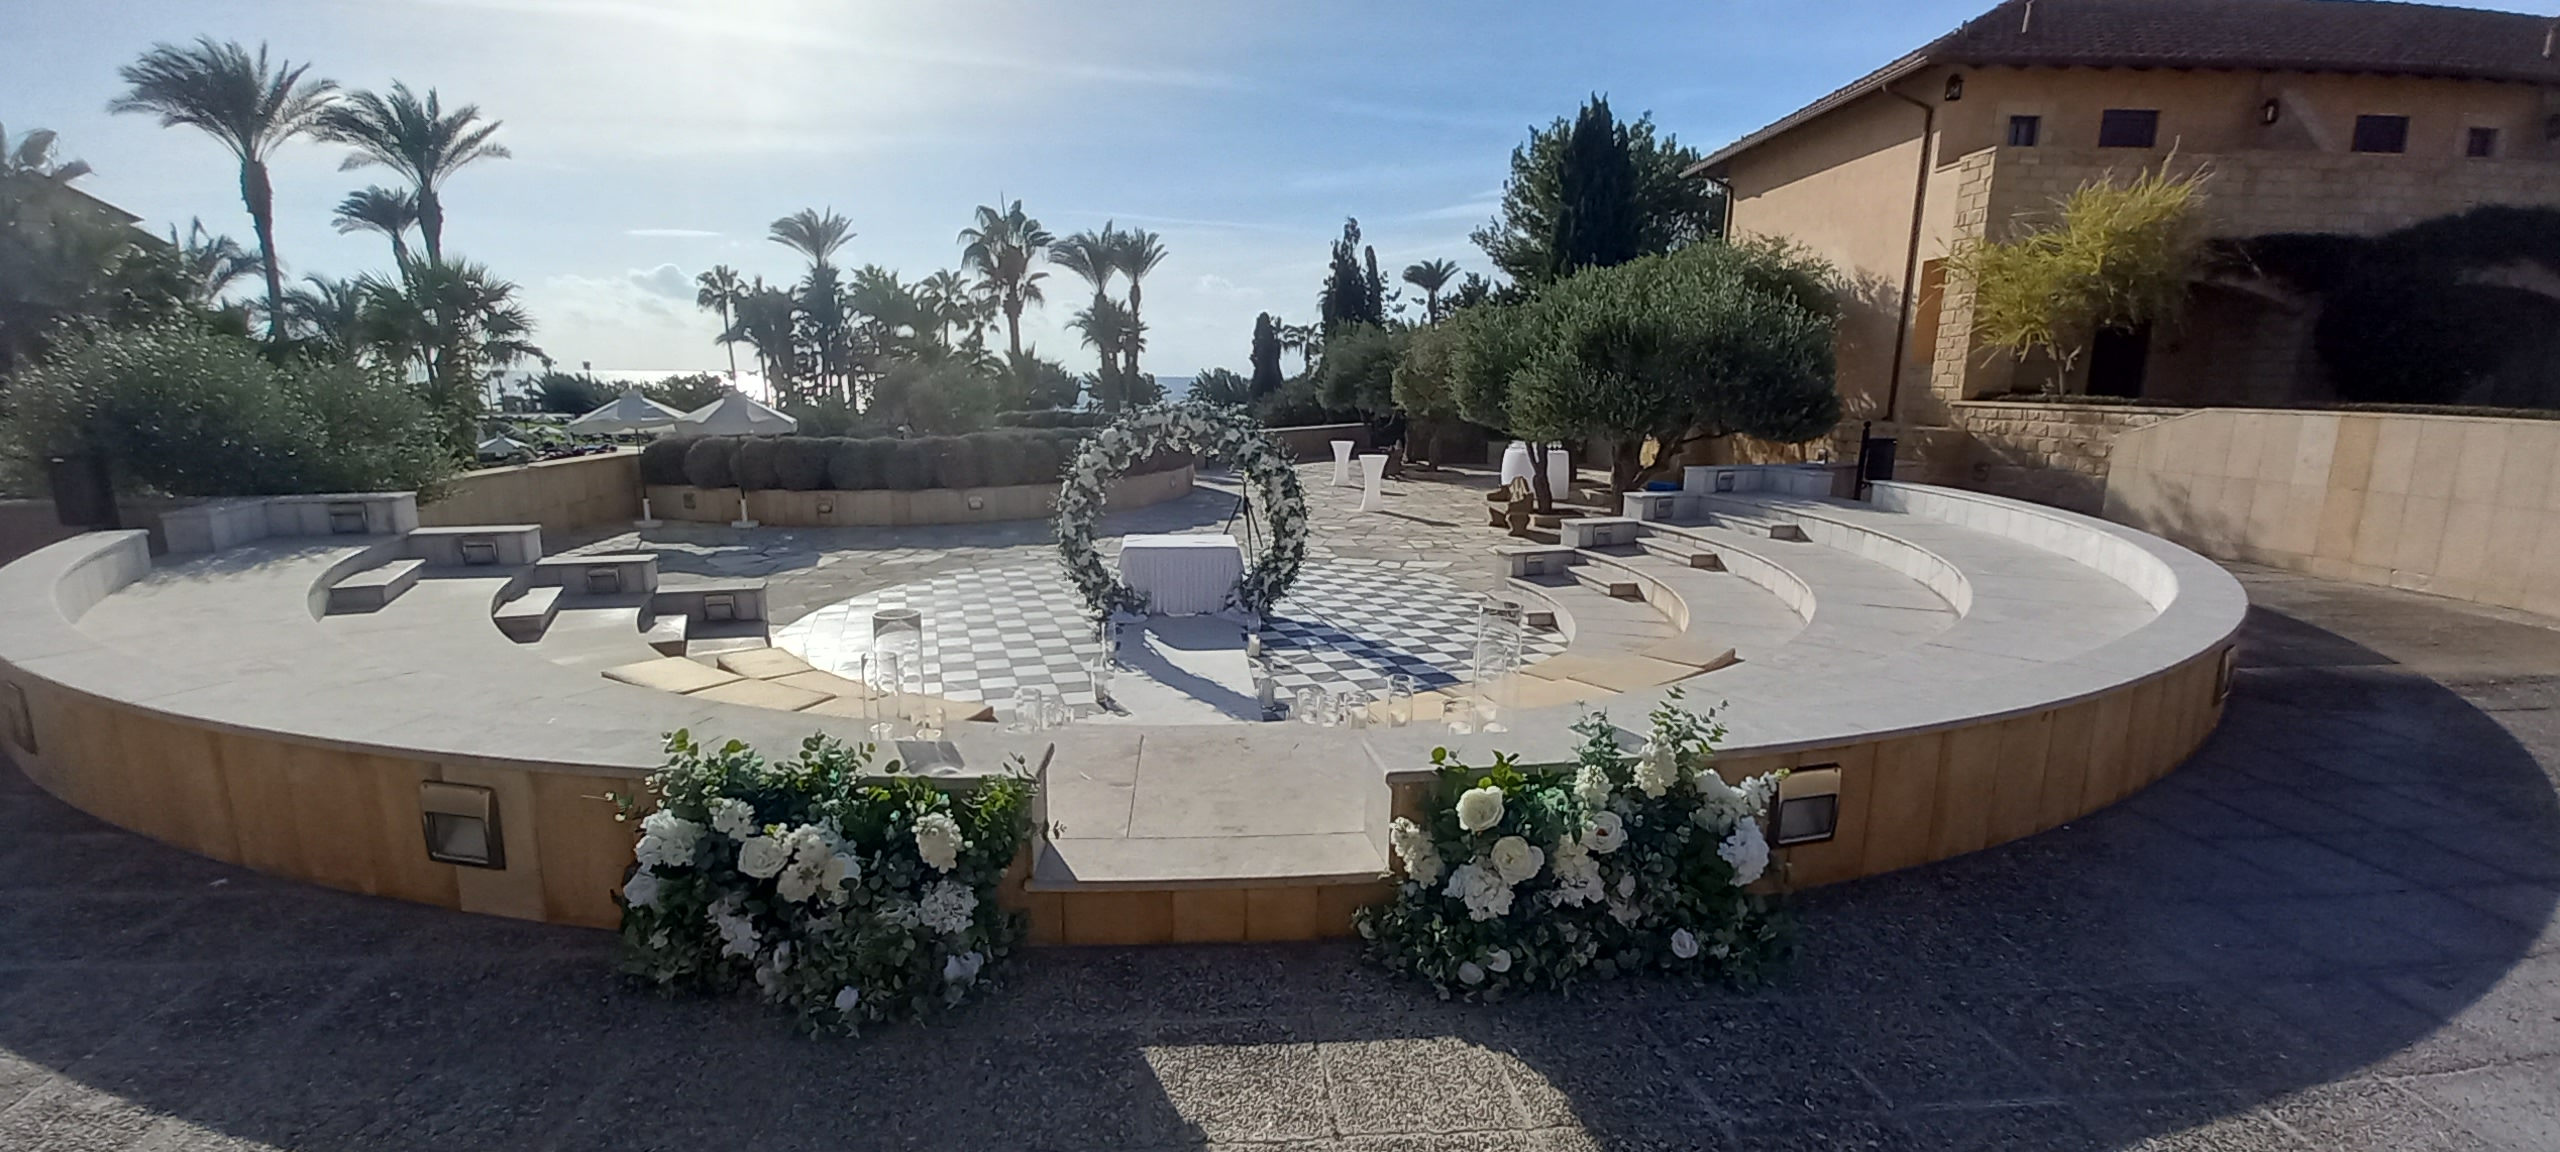 Book your wedding day in Elysium Hotel Paphos